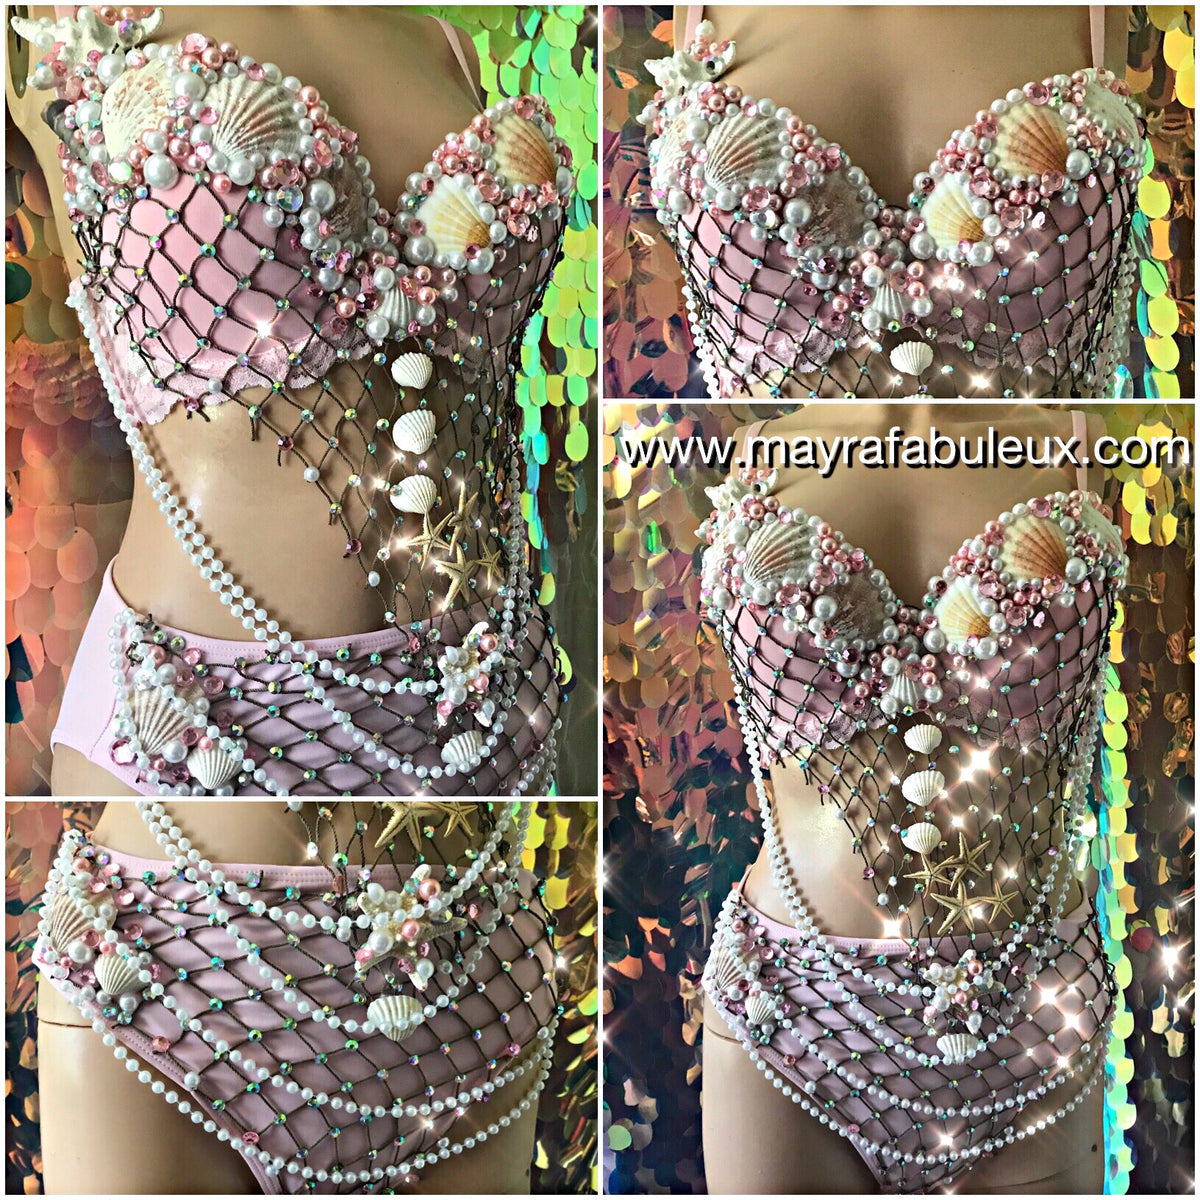 Pink Mermaid Rave Bra and High Waisted Bottoms - Complete Rave